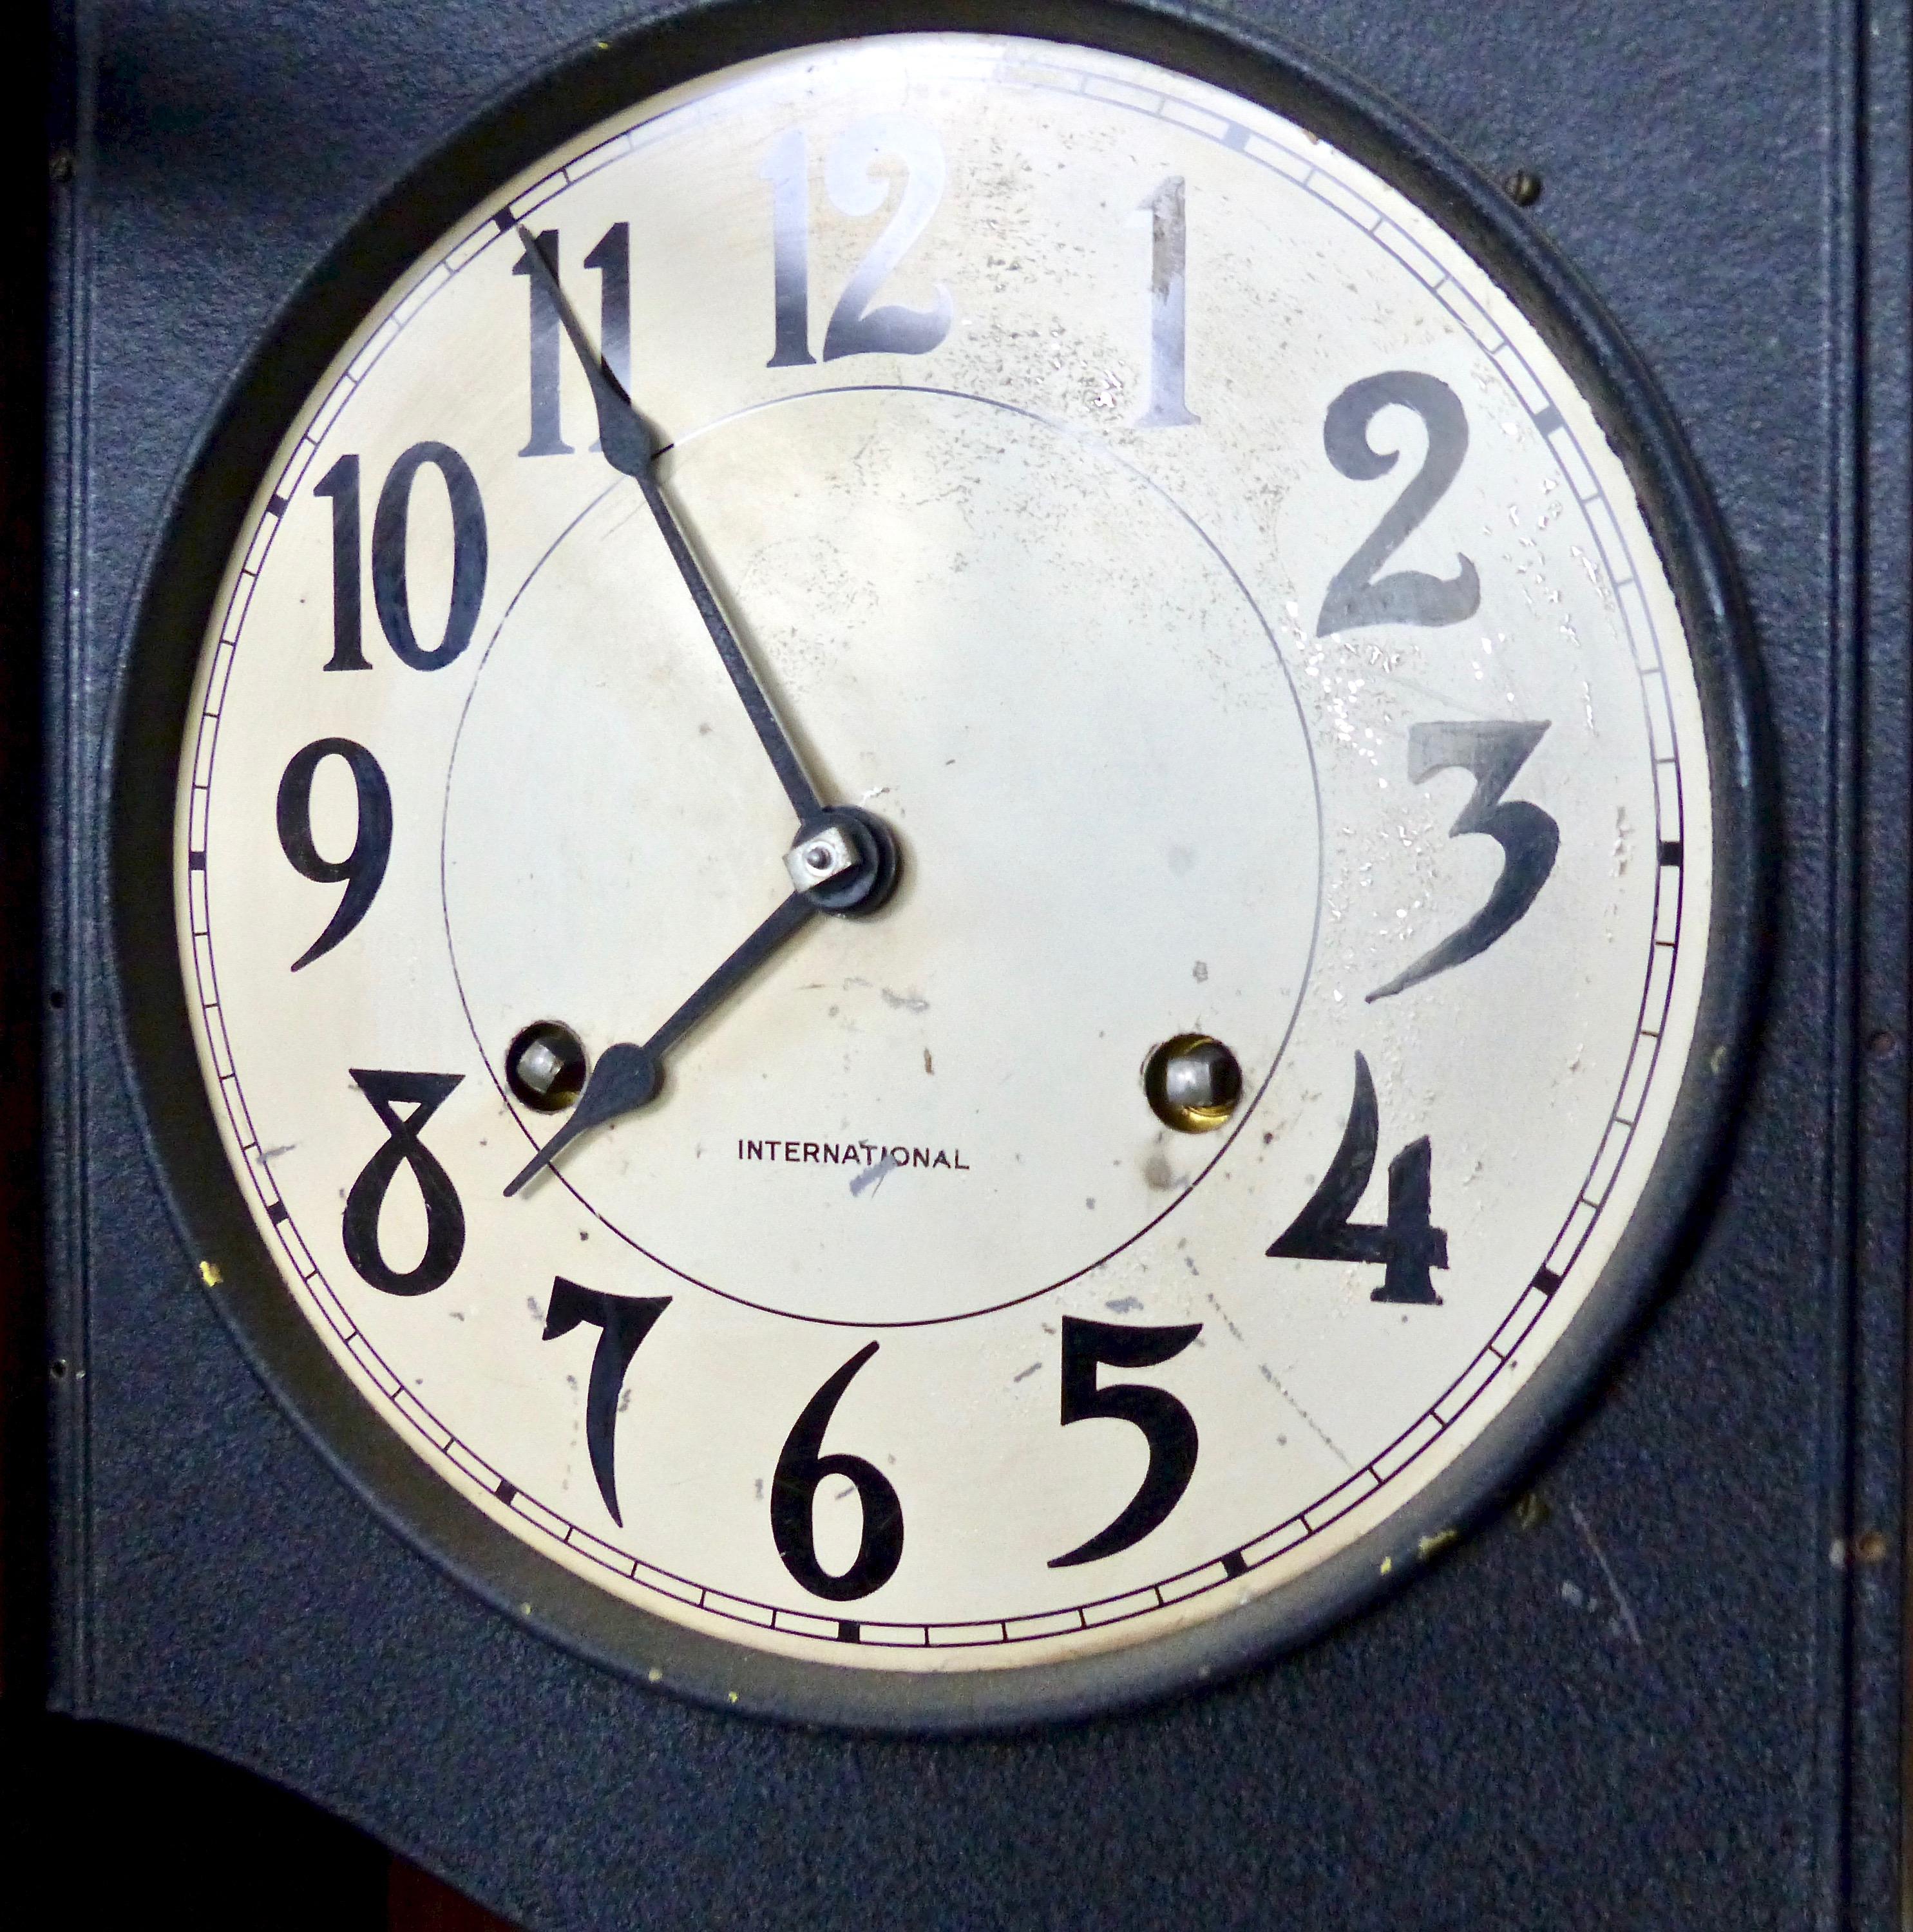 An oakwood cabinet clock, made by International Business Machines (IBM) in the 1930s. Interior pendulum.
Dimensions: 36” H x 15.5” W x 9” D.